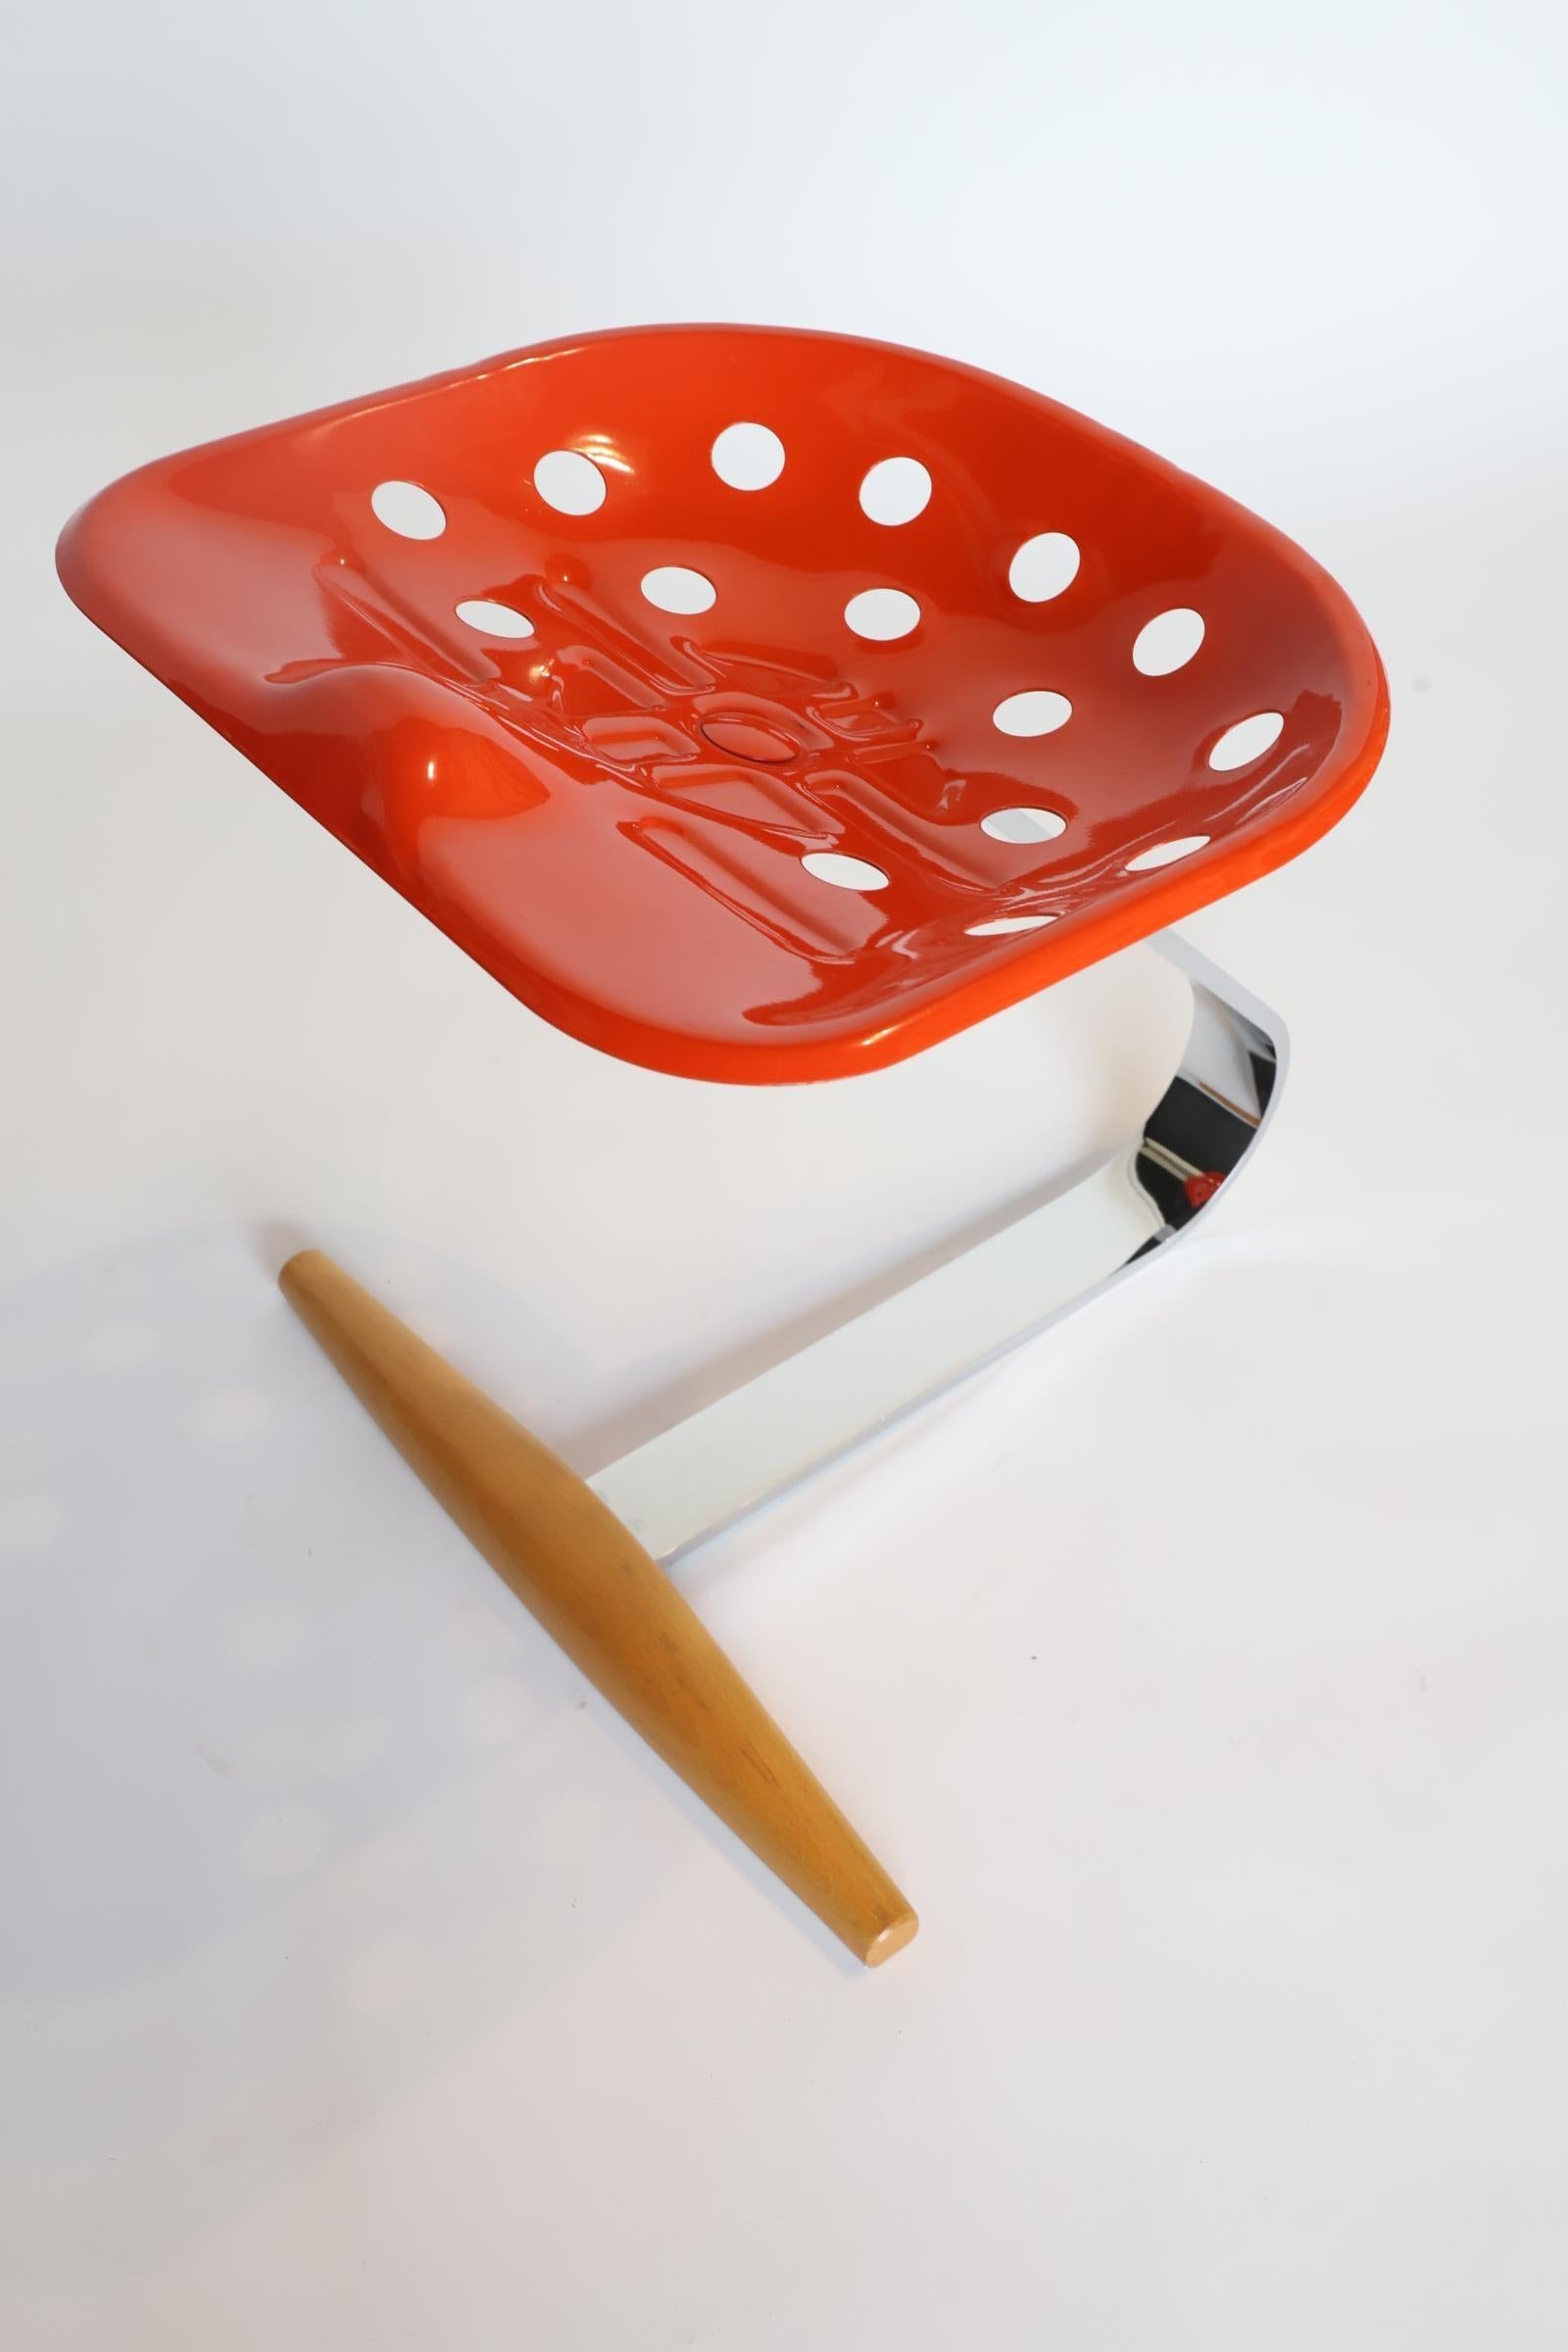 Contemporary Zanotta Mezzadro Stool in Orange/Red with Steel and Wood Base